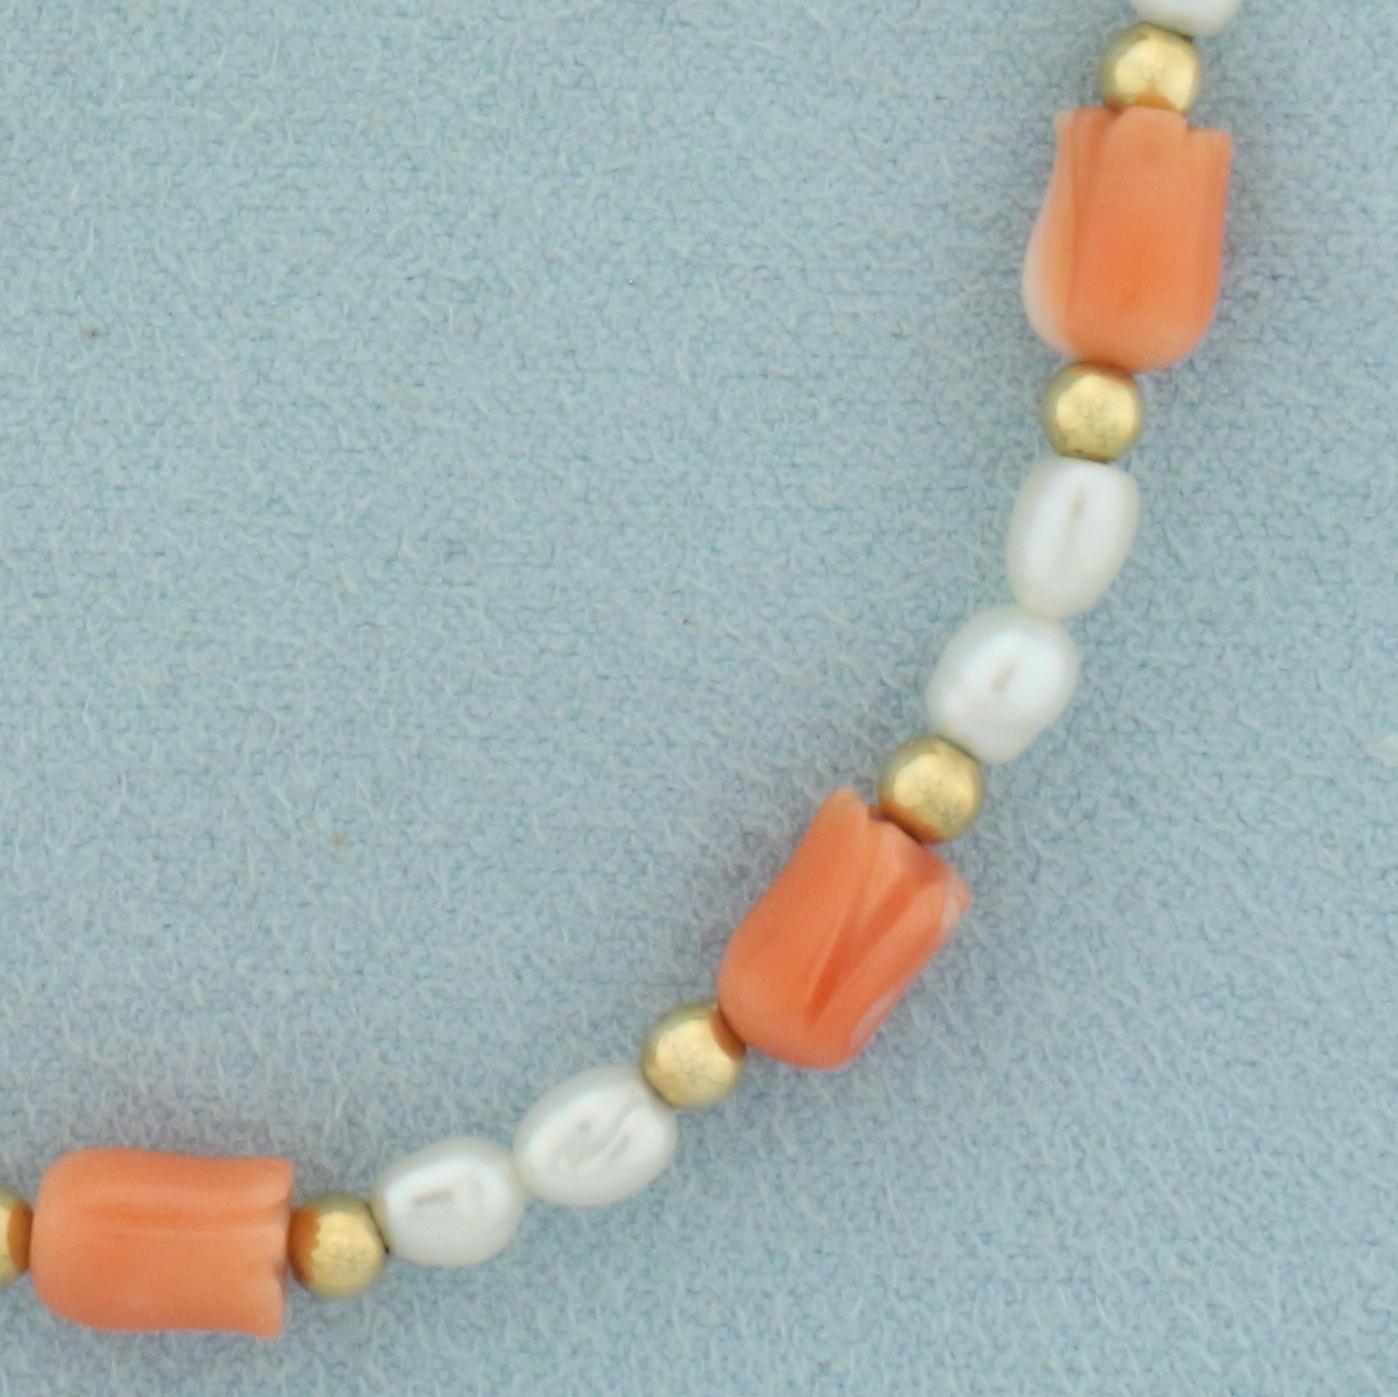 Vintage Pink Coral, Pearl, And Gold Bead Bracelet In 14k Yellow Gold